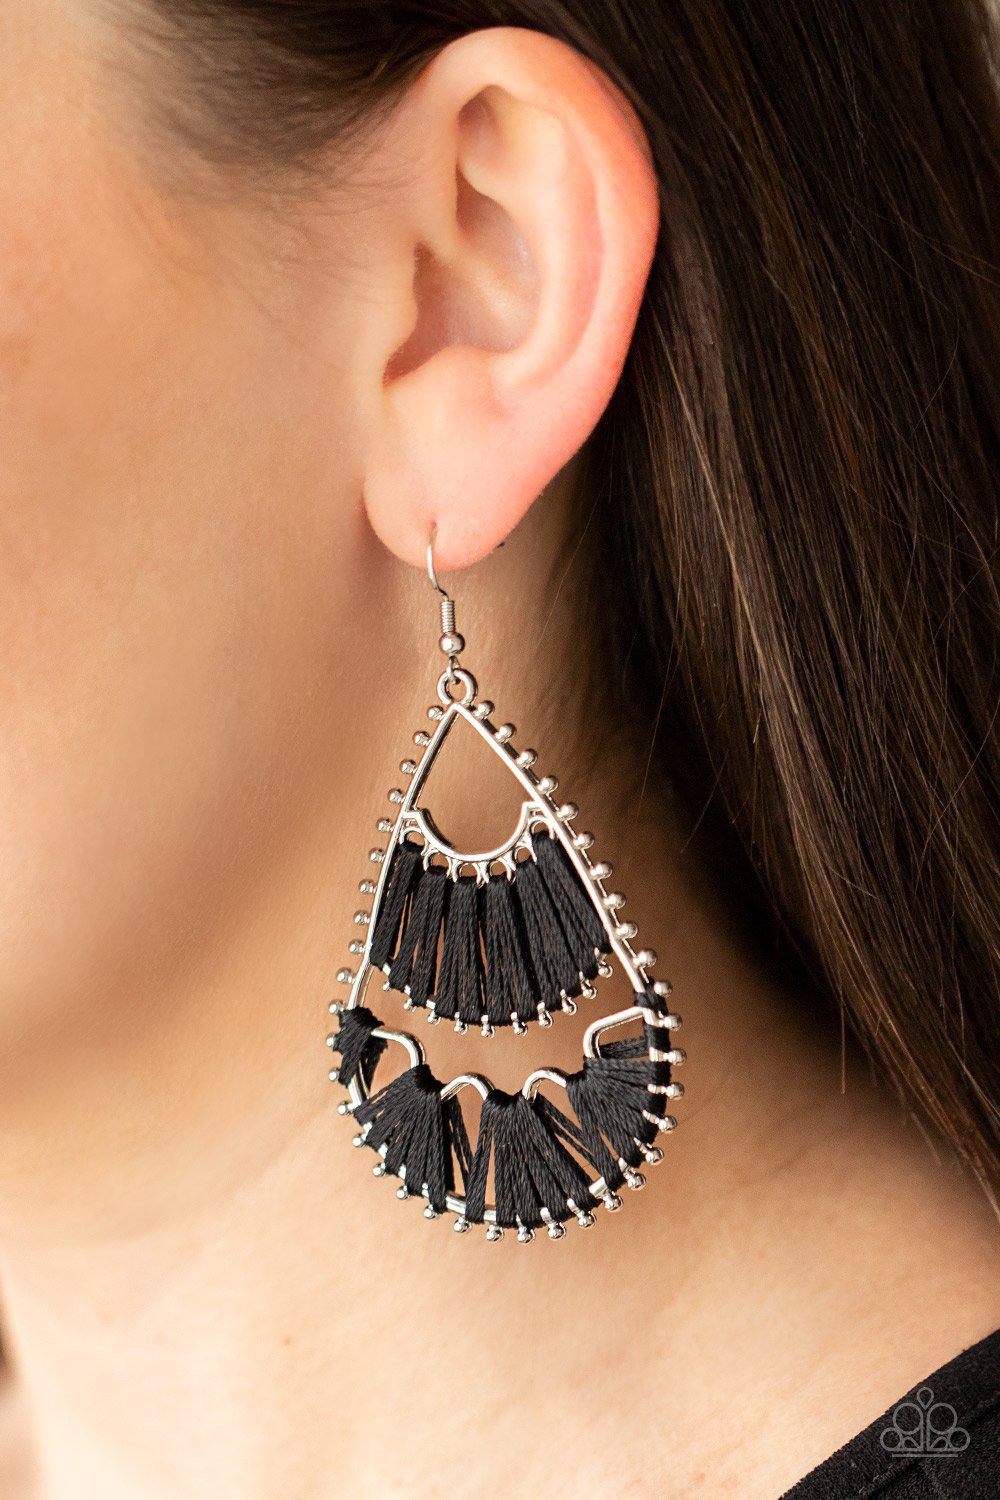 Samba Scene Black and Silver Earrings - Paparazzi Accessories- model - CarasShop.com - $5 Jewelry by Cara Jewels